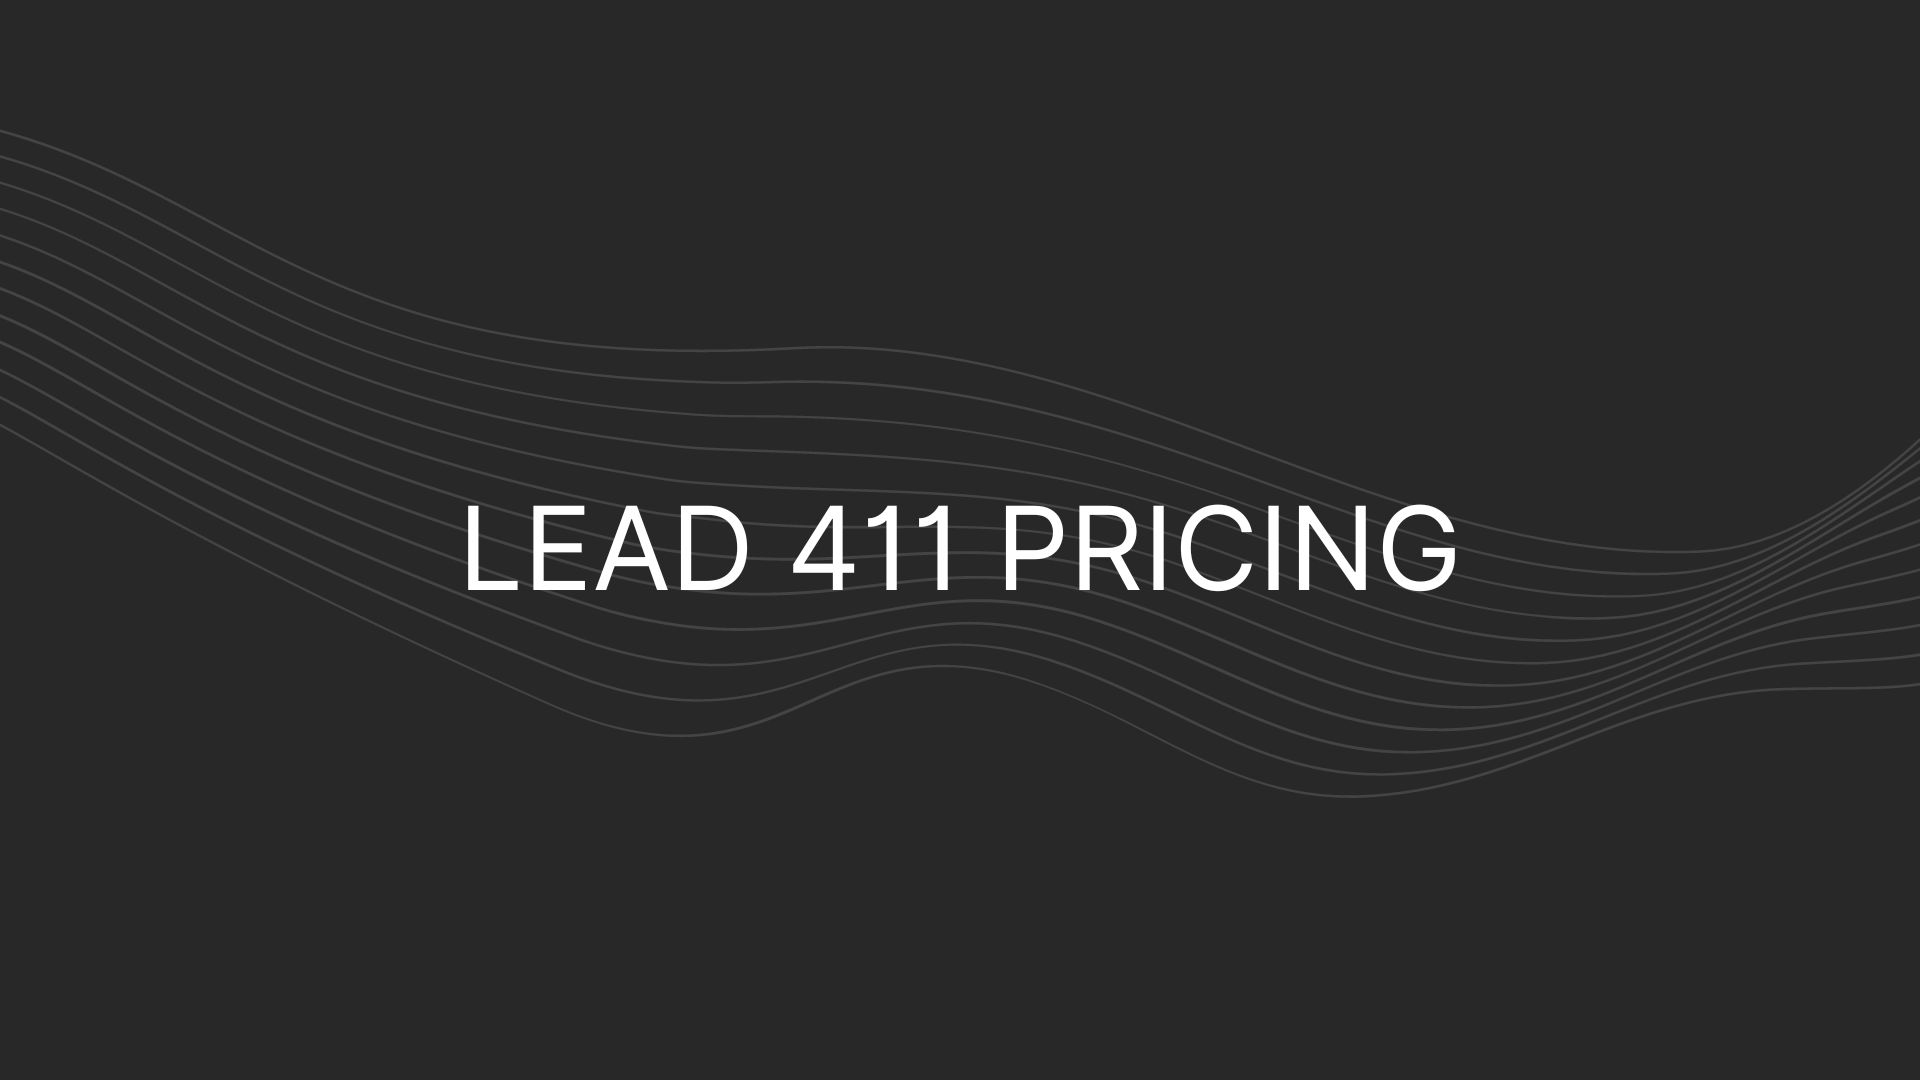 Lead 411 Pricing